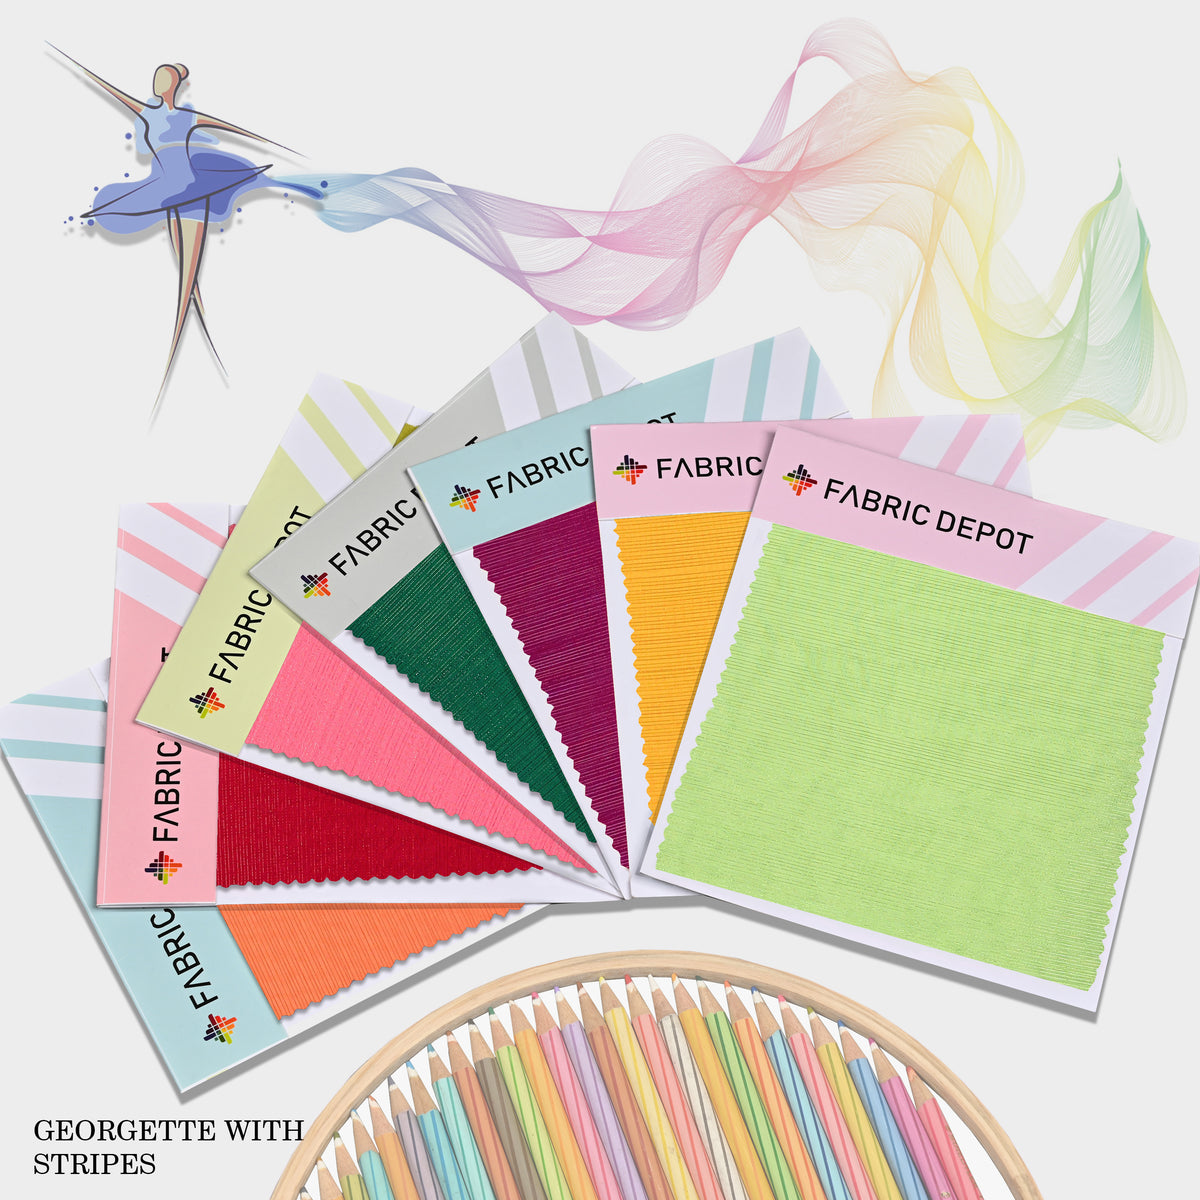 Georgette with Stripes-Swatch Card